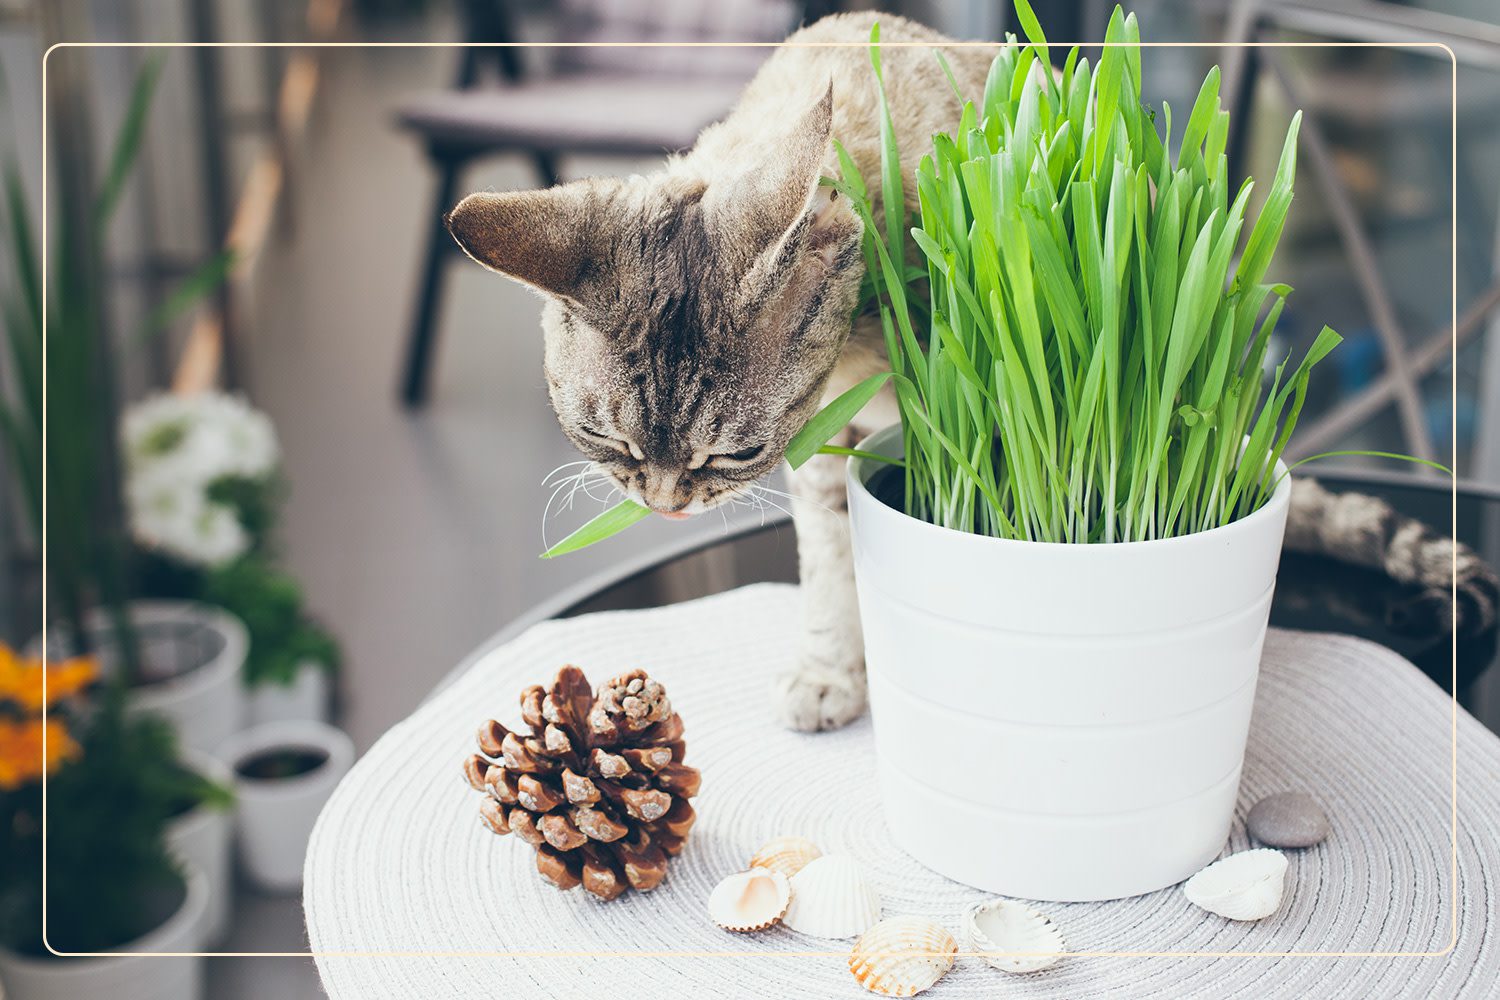 a tabby cat nibbles on Cat Grass (Dactylis glomerata), which is nontoxic to pets, that is surrounded by a pinecone and seashells on a porch